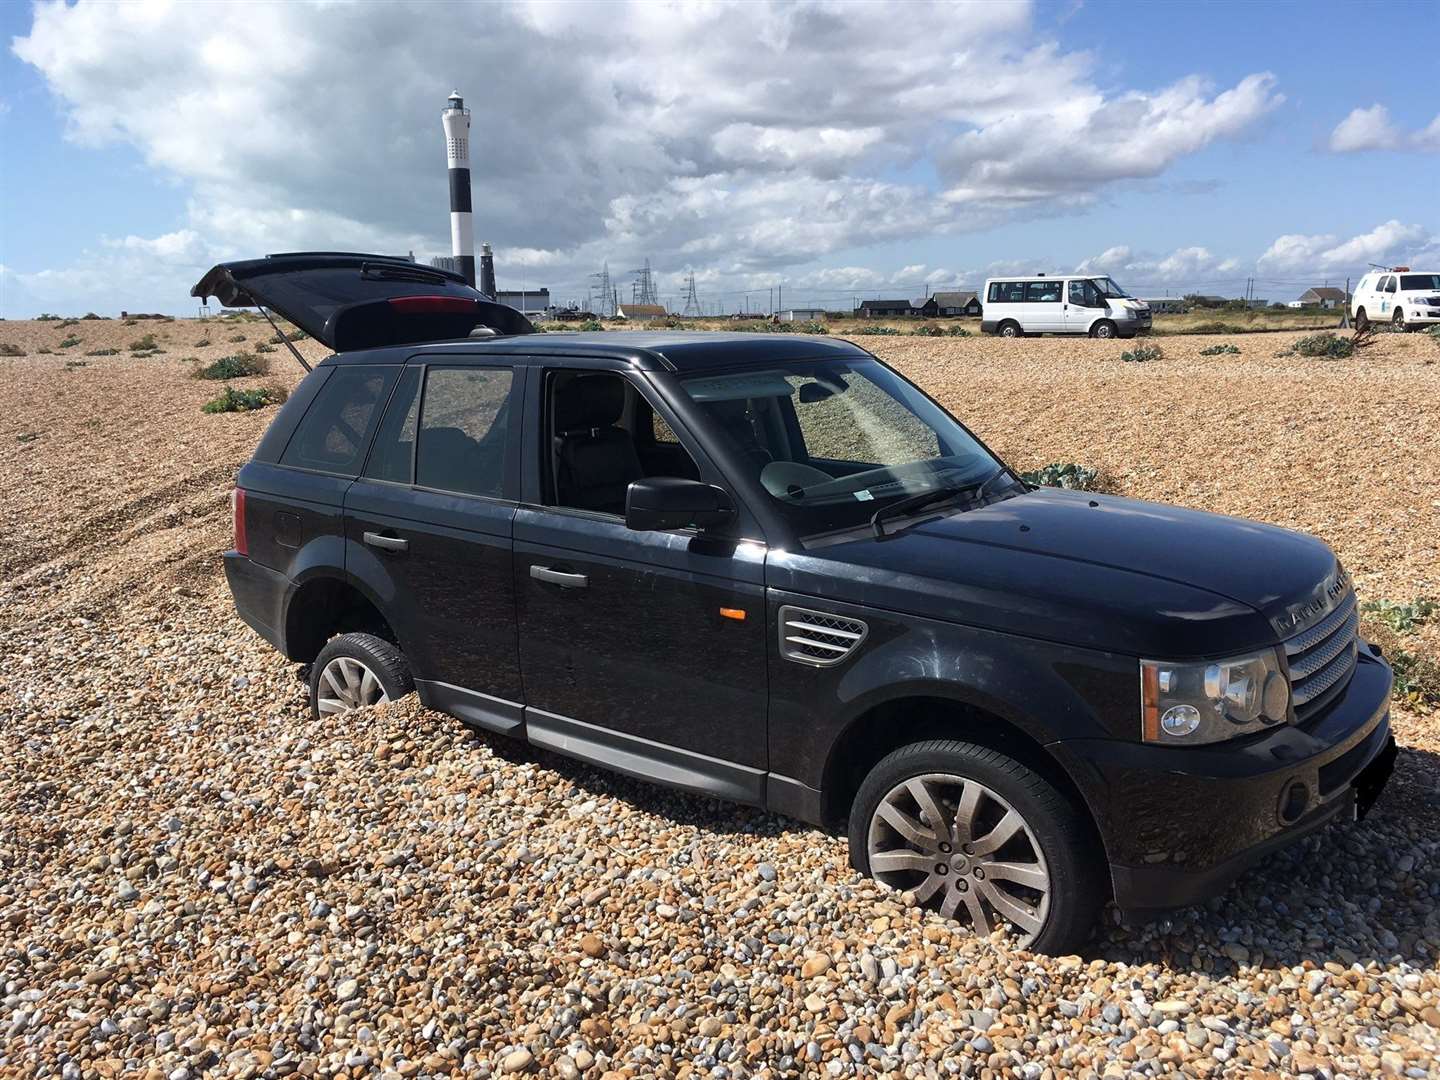 The 4x4 became stuck at the Dungeness National Nature Reserve